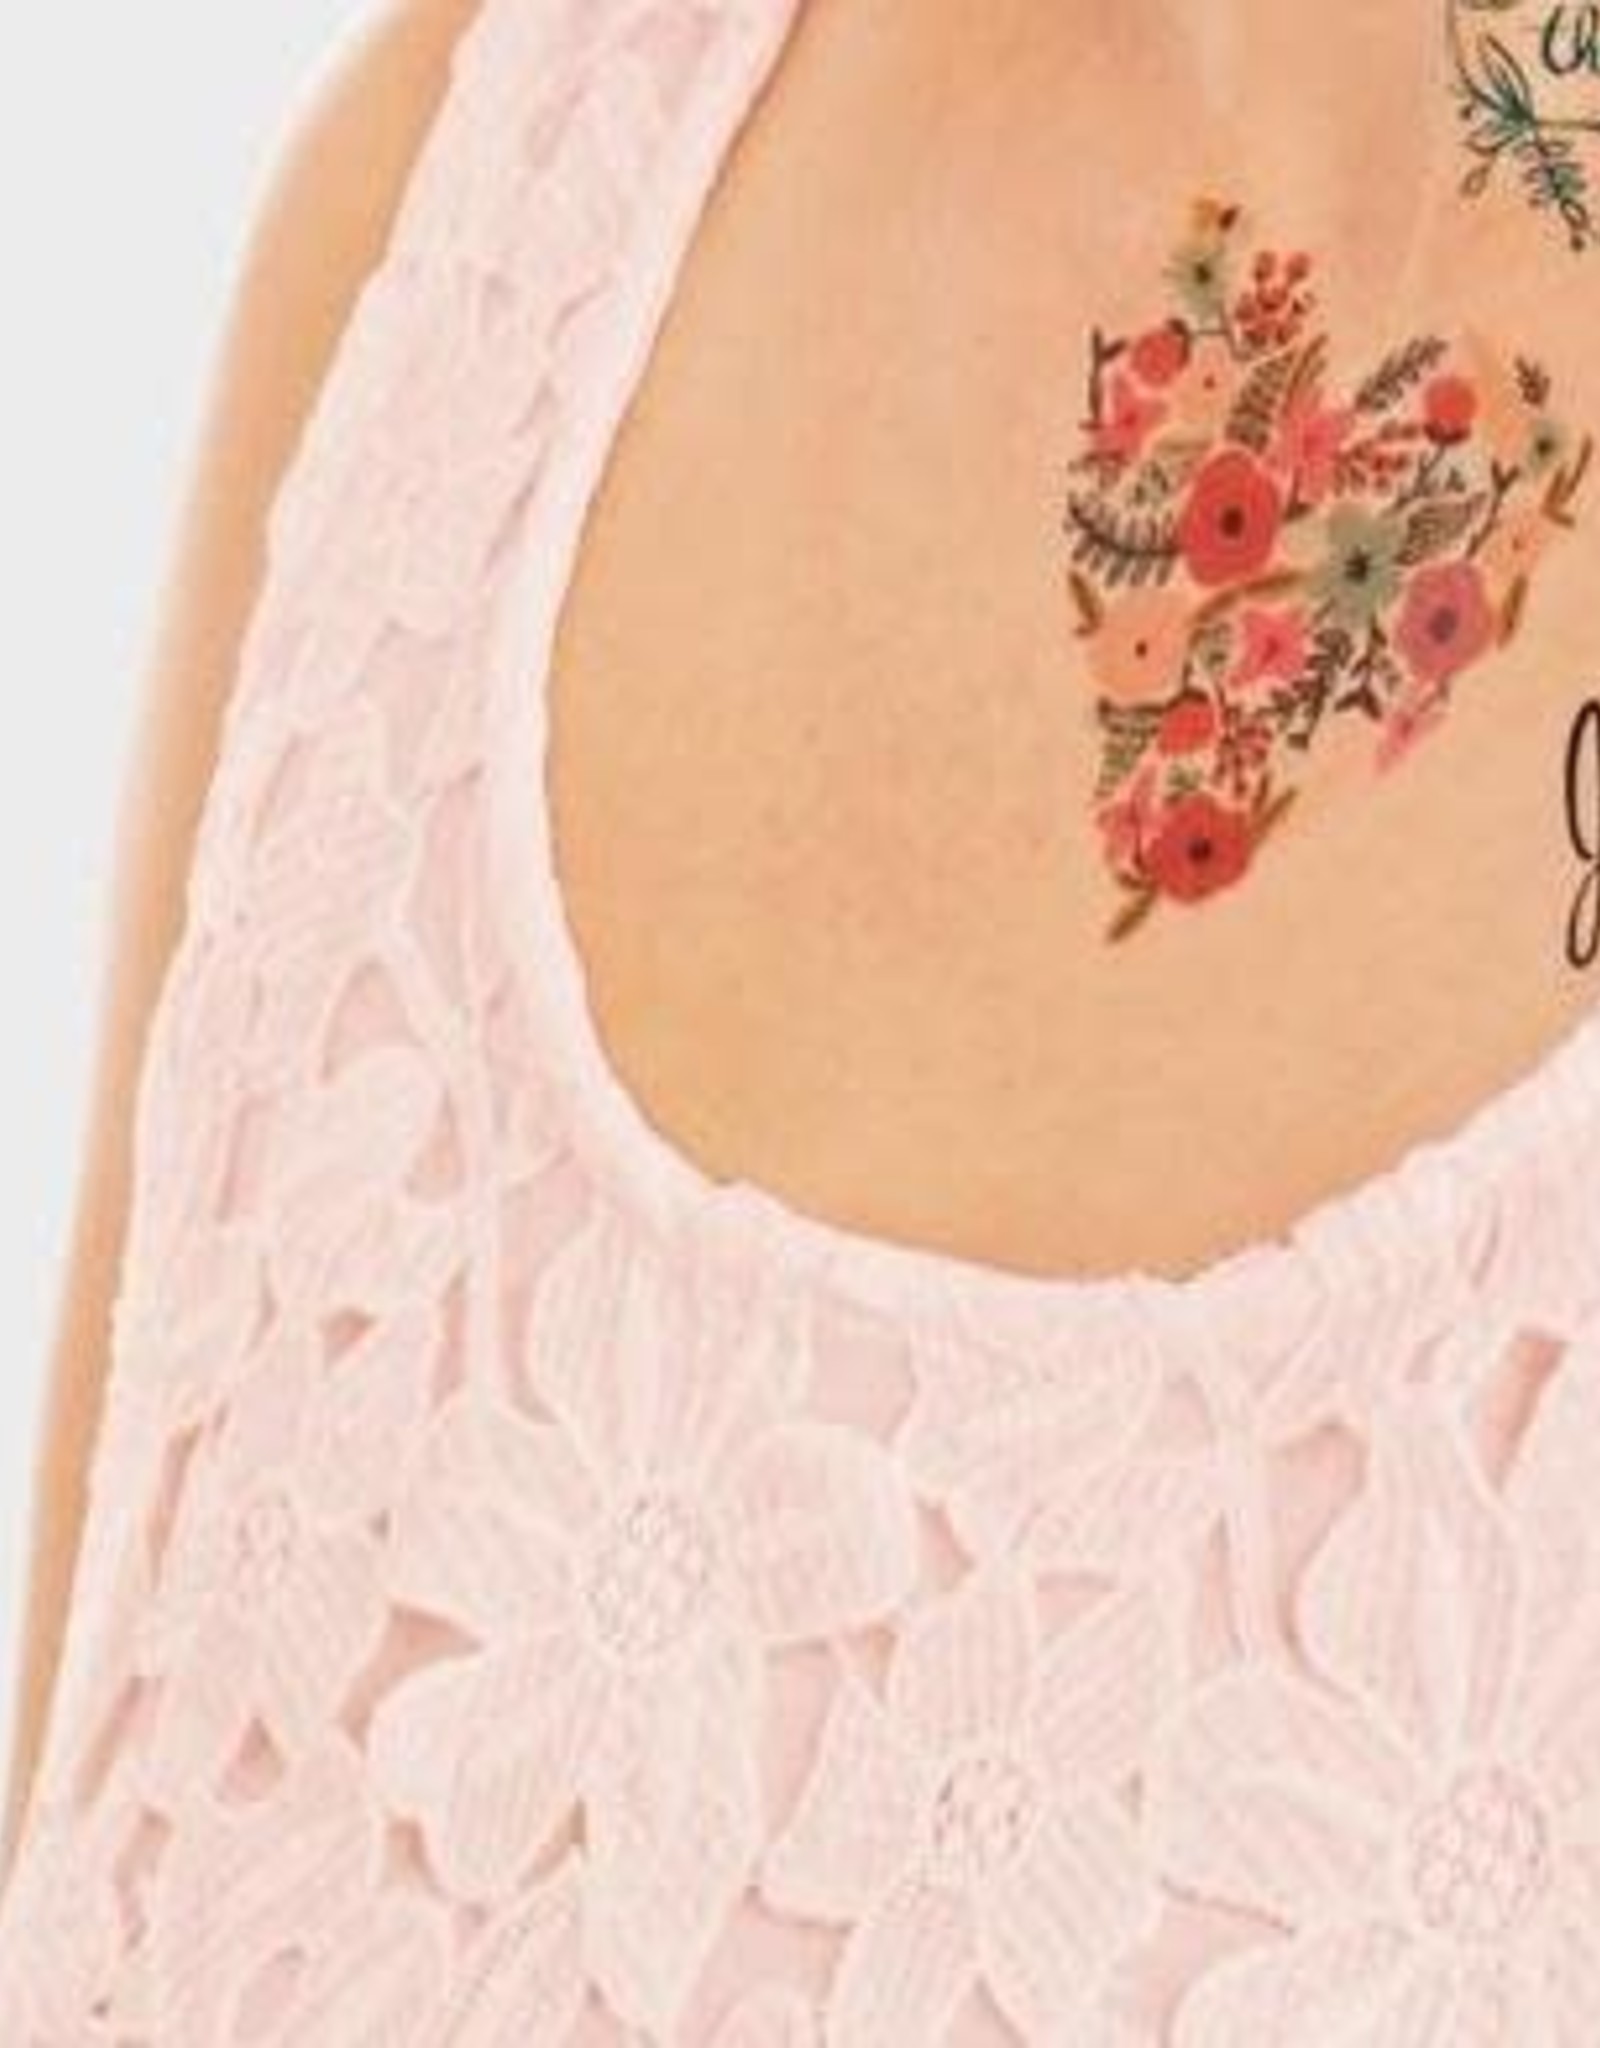 Tattly Floral Heart Love  by Rifle Paper Co. - Tattly Temporary Tattoos (Pairs)